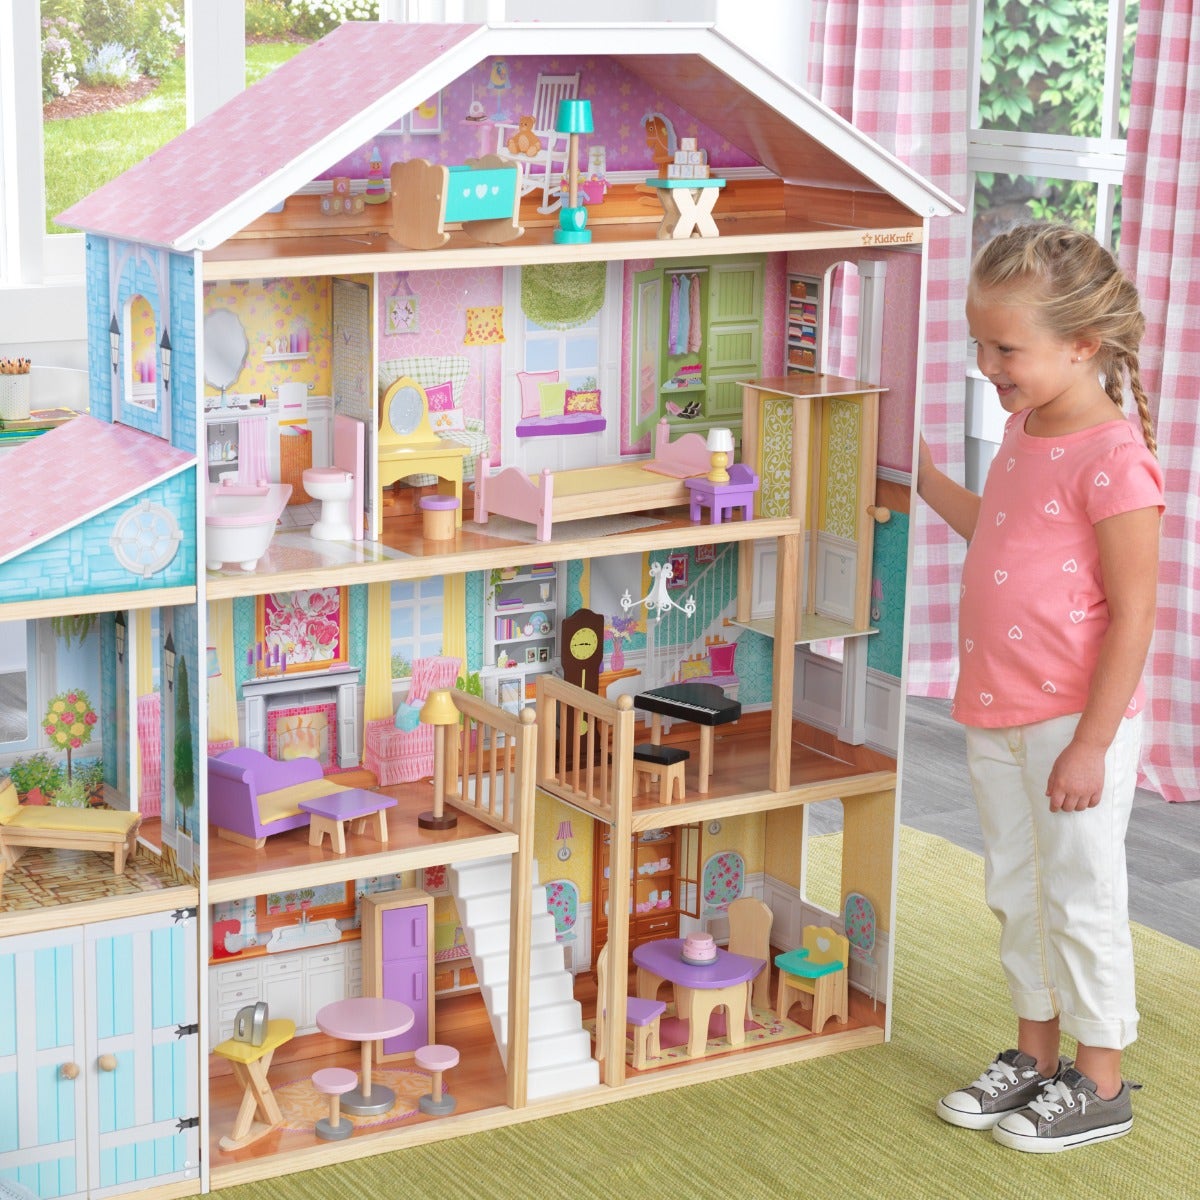 True to Its Name: At four and a half feet tall, it's one of our most impressive dollhouses. There's plenty of room for friends to play.